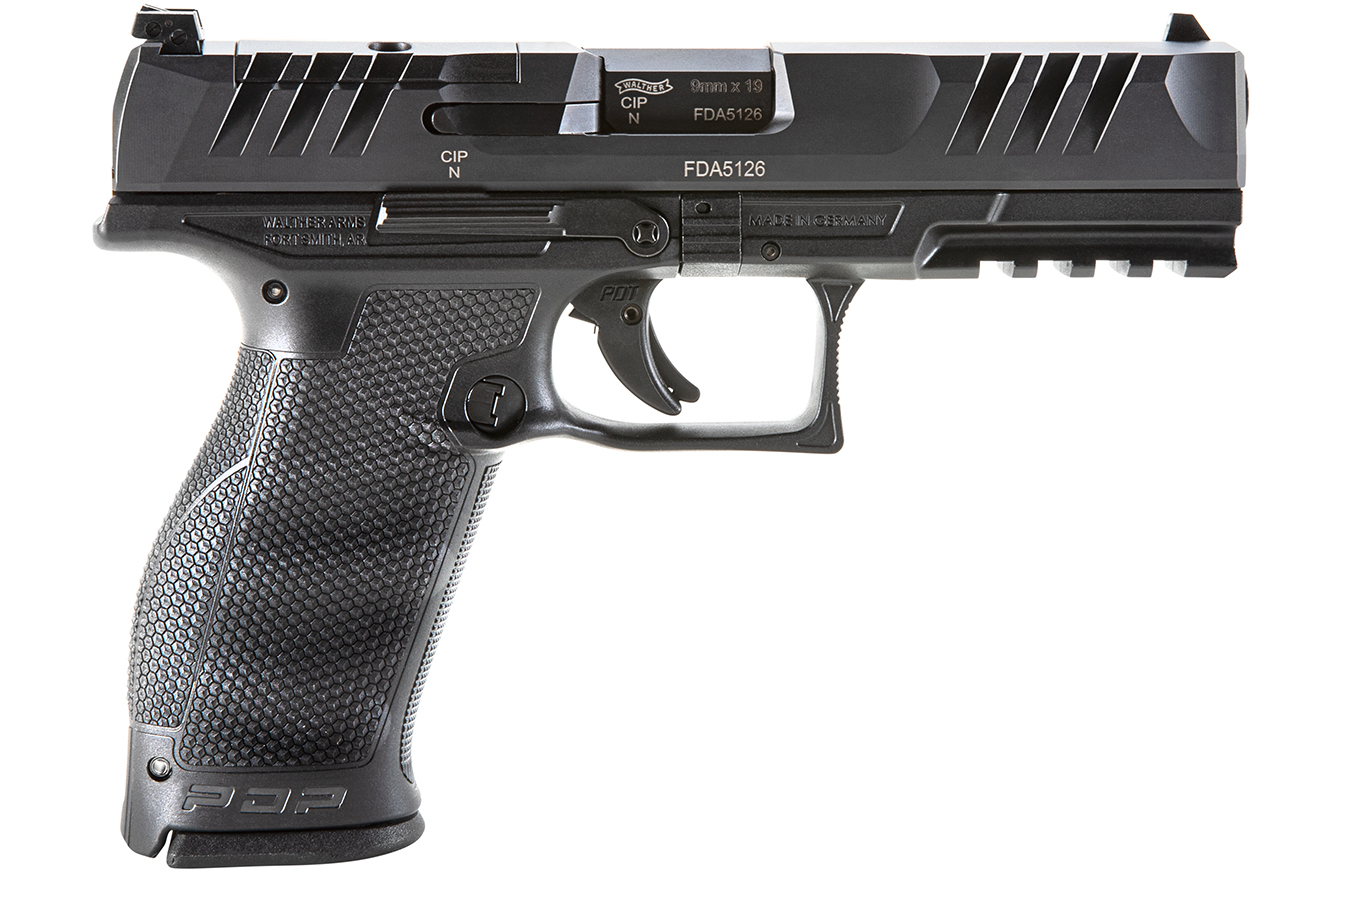 WALTHER PDP FULL-SIZE 9MM OPTICS READY PISTOL WITH 4.5 INCH BARREL